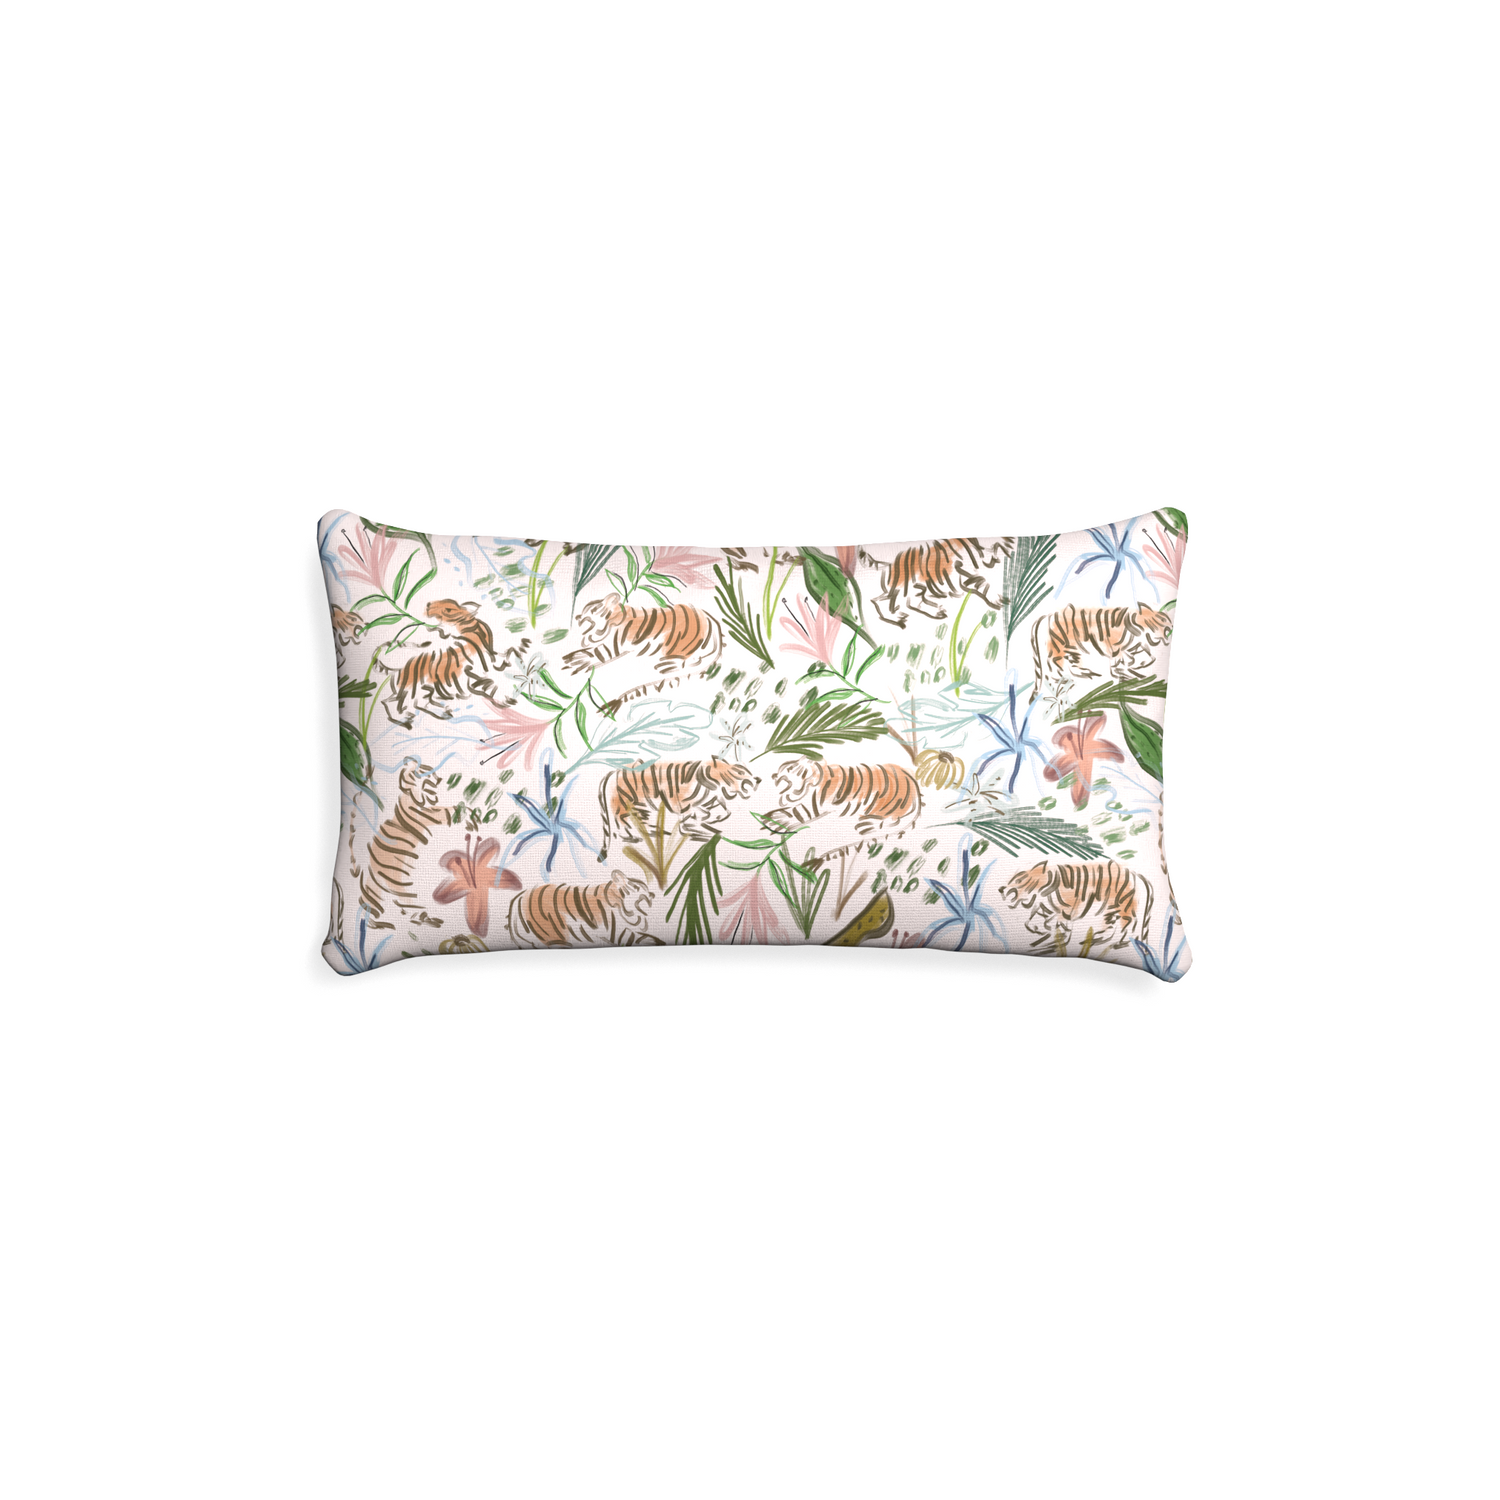 Petite-lumbar frida pink custom pink chinoiserie tigerpillow with none on white background